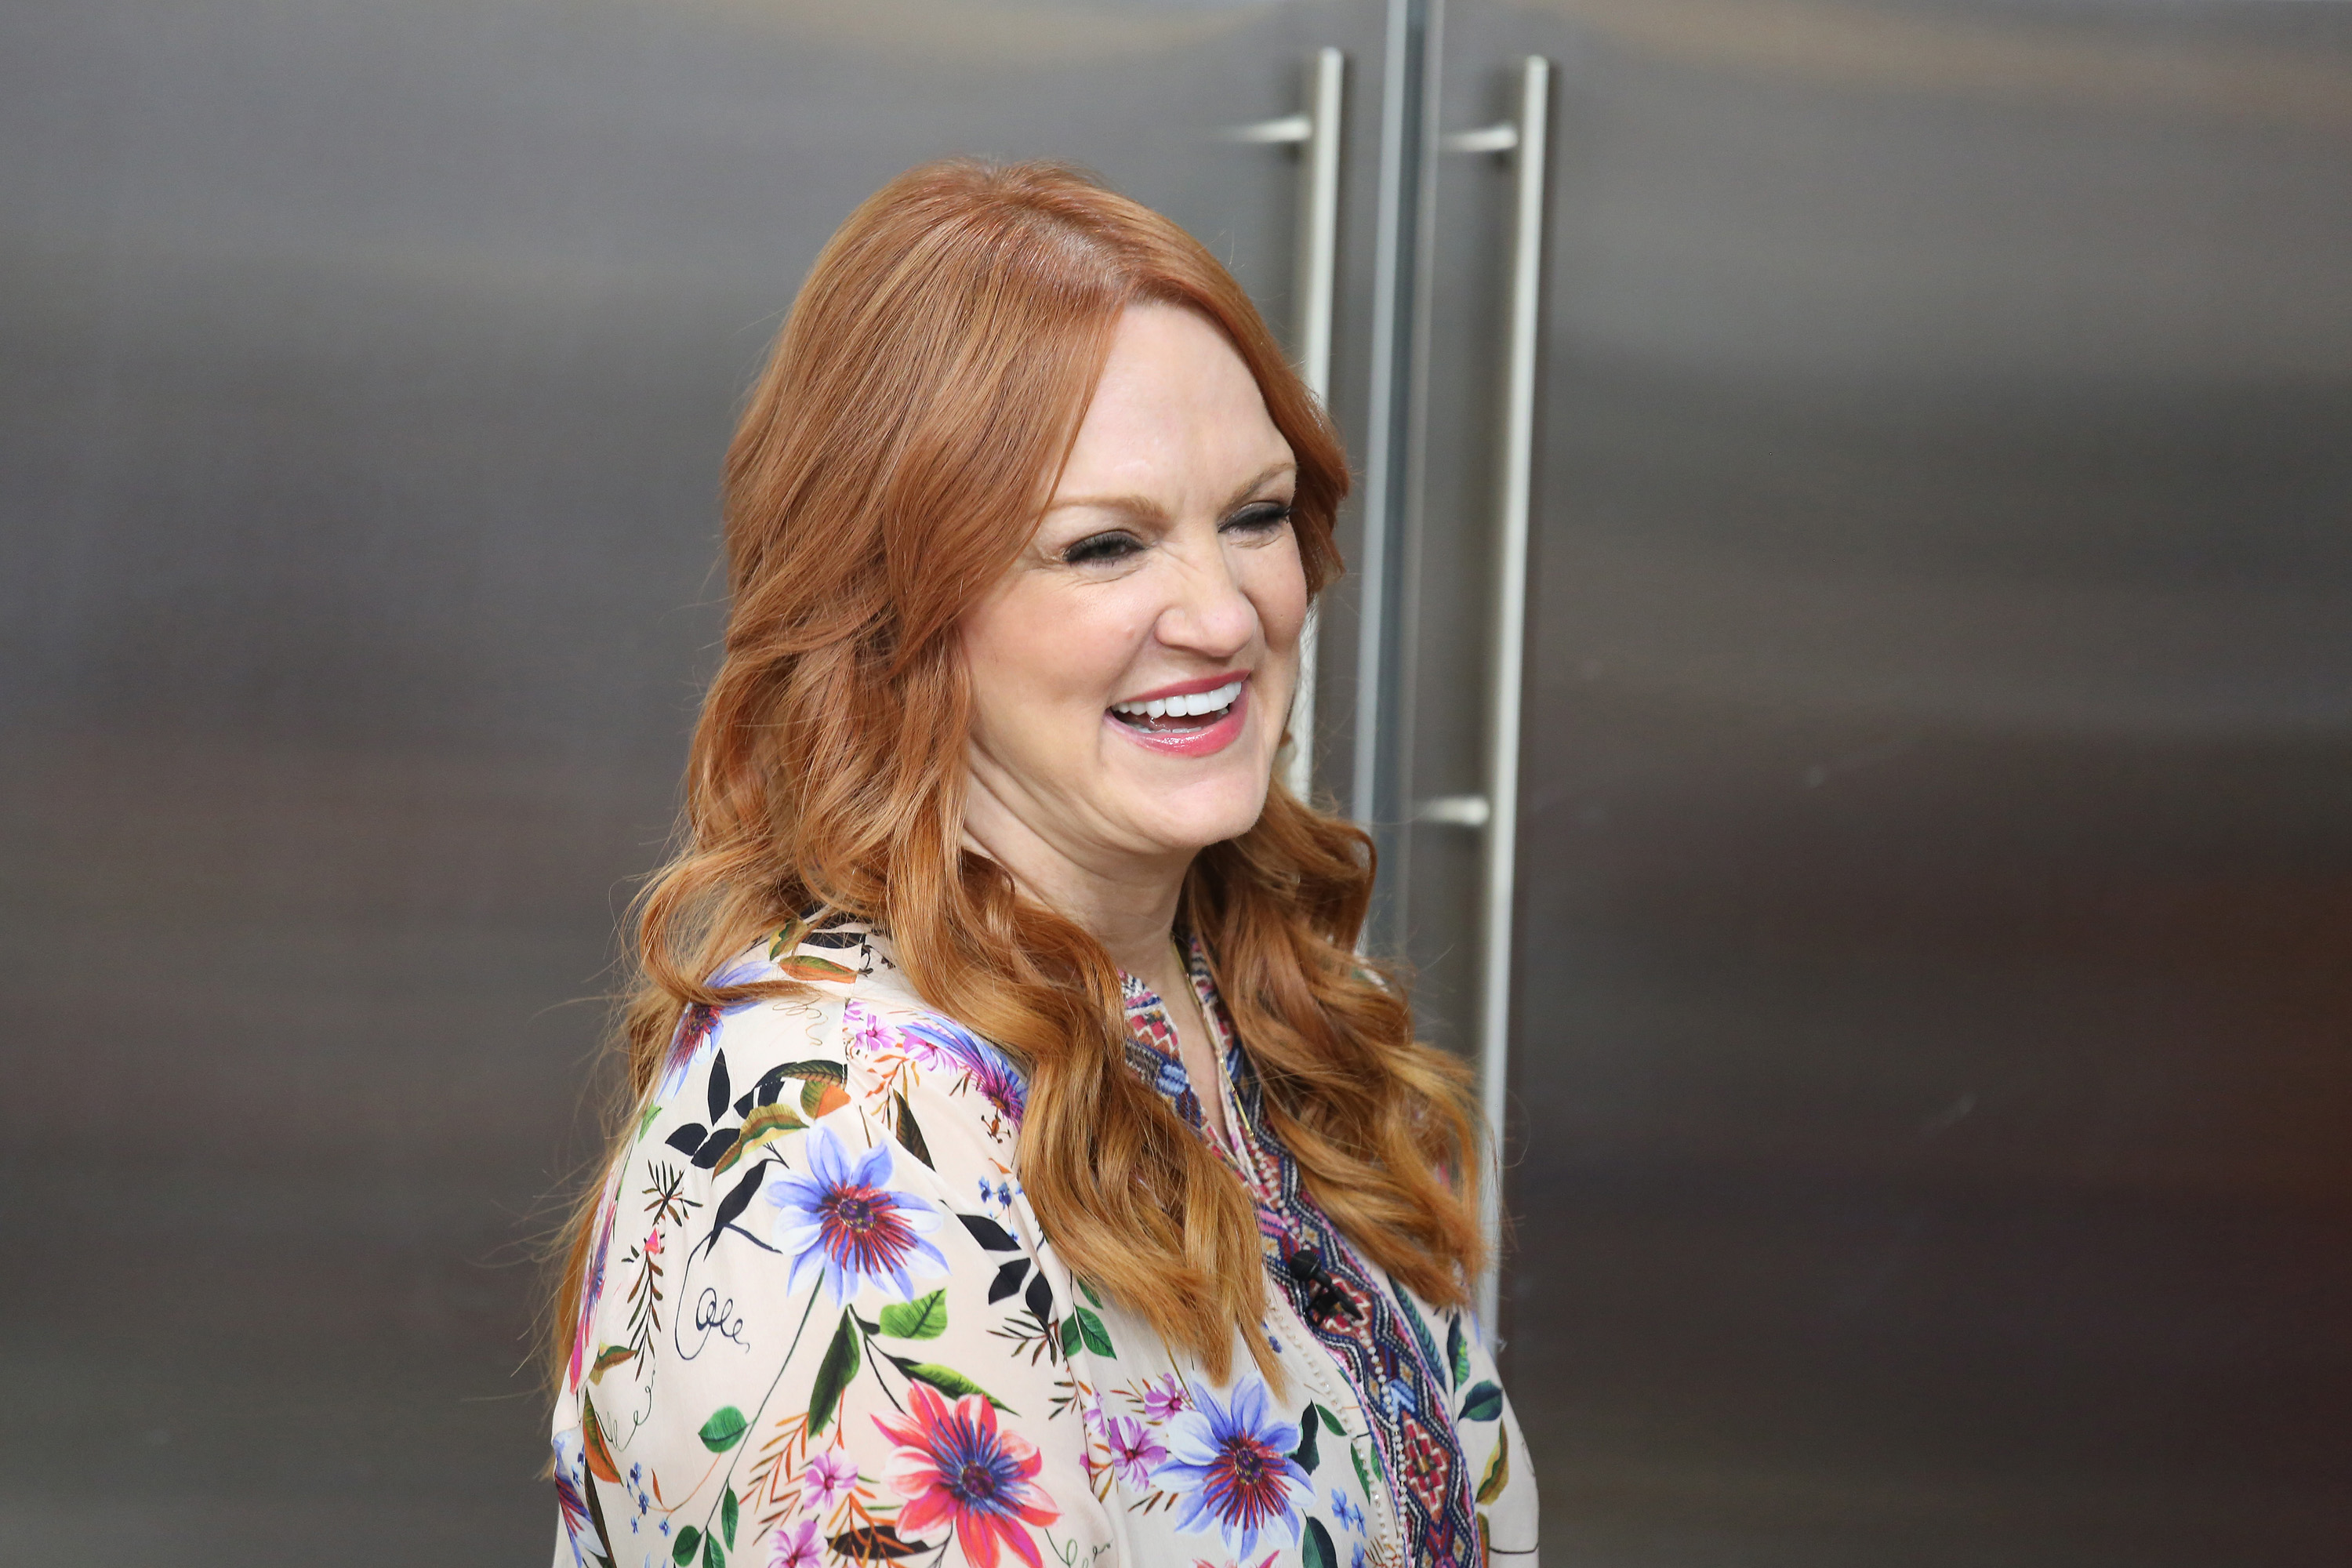 'The Pioneer Woman' star Ree Drummond's risotto is a 'game changer,' the Food Network personality says.